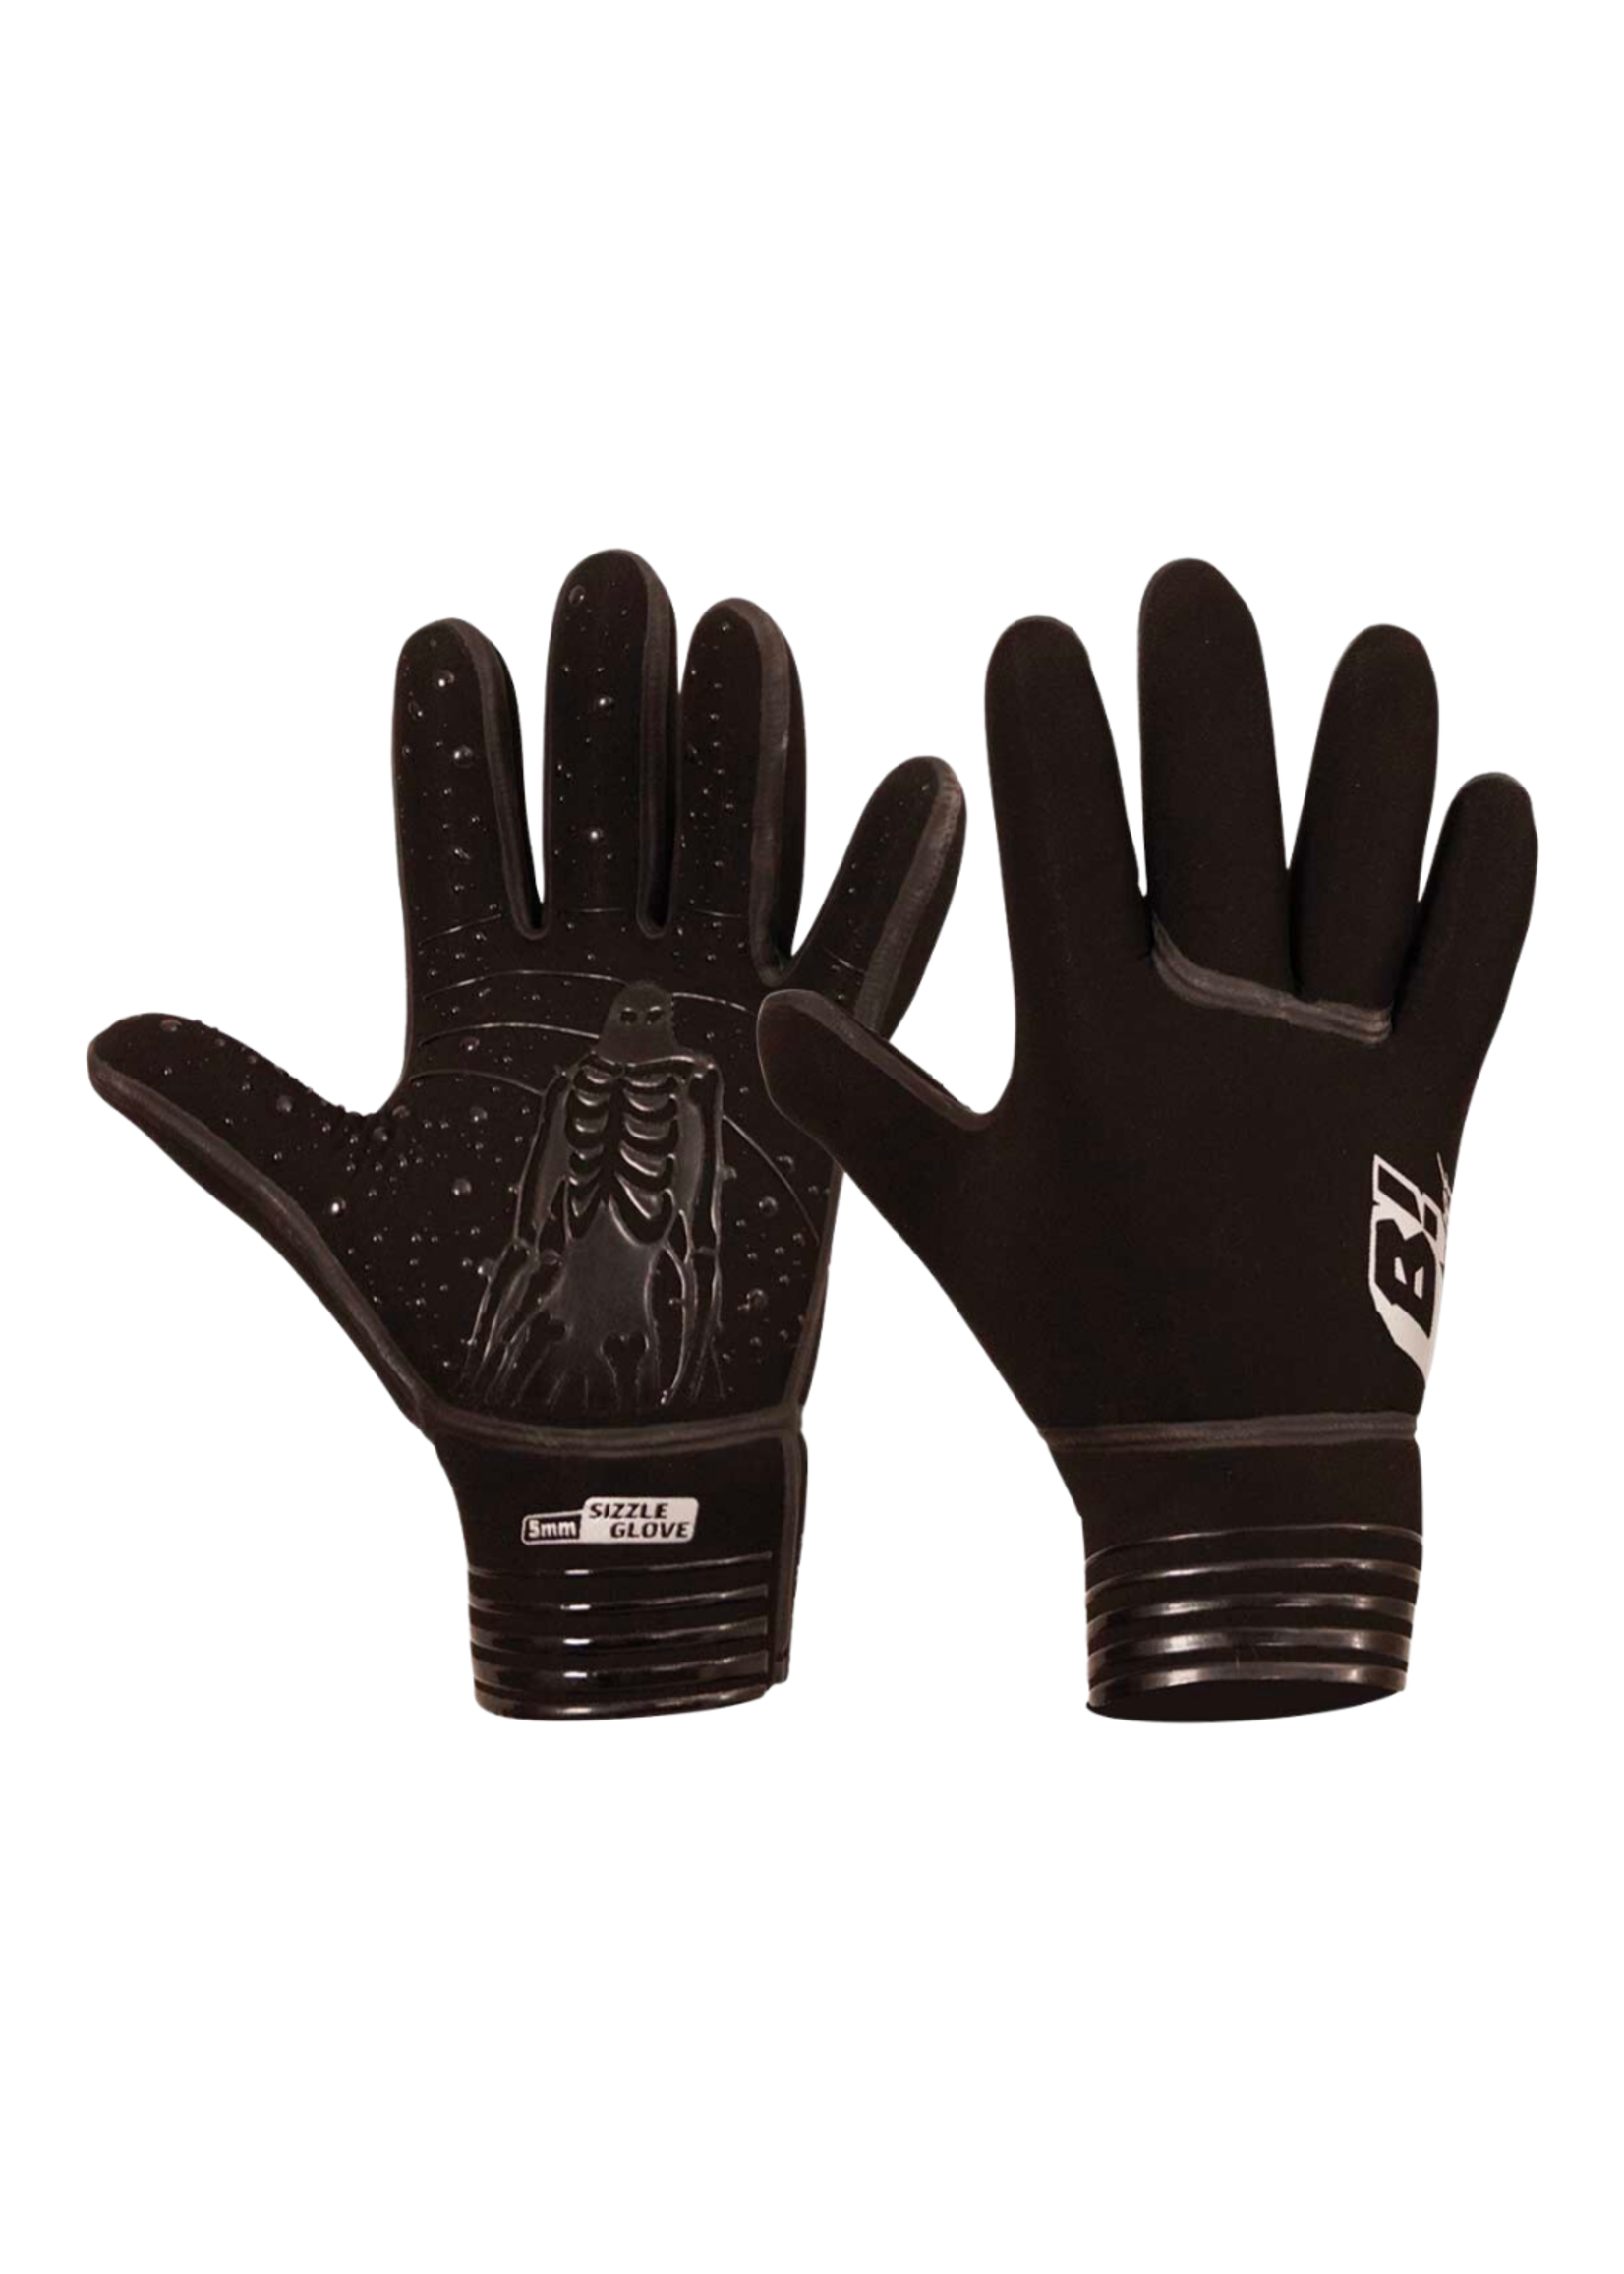 BUELL 5MM SIZZLE 5 FINGER GLOVES